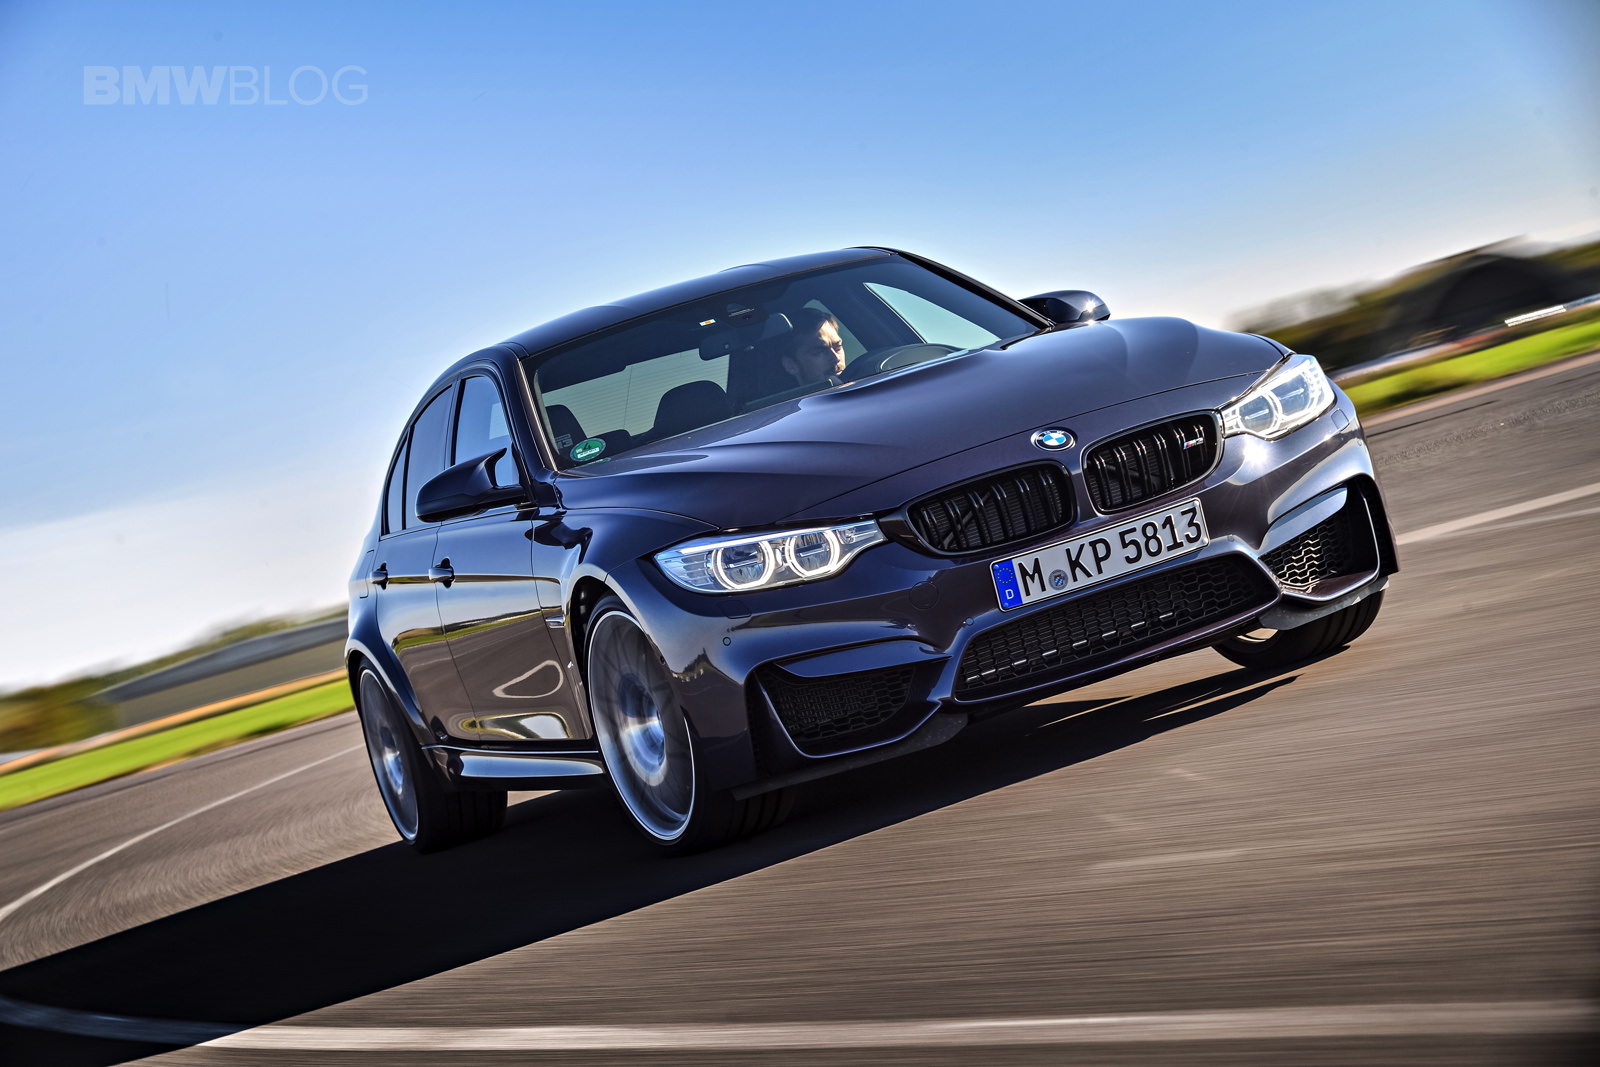 The BMW M3 30 Jahre anniversary model is a beauty1600 x 1067